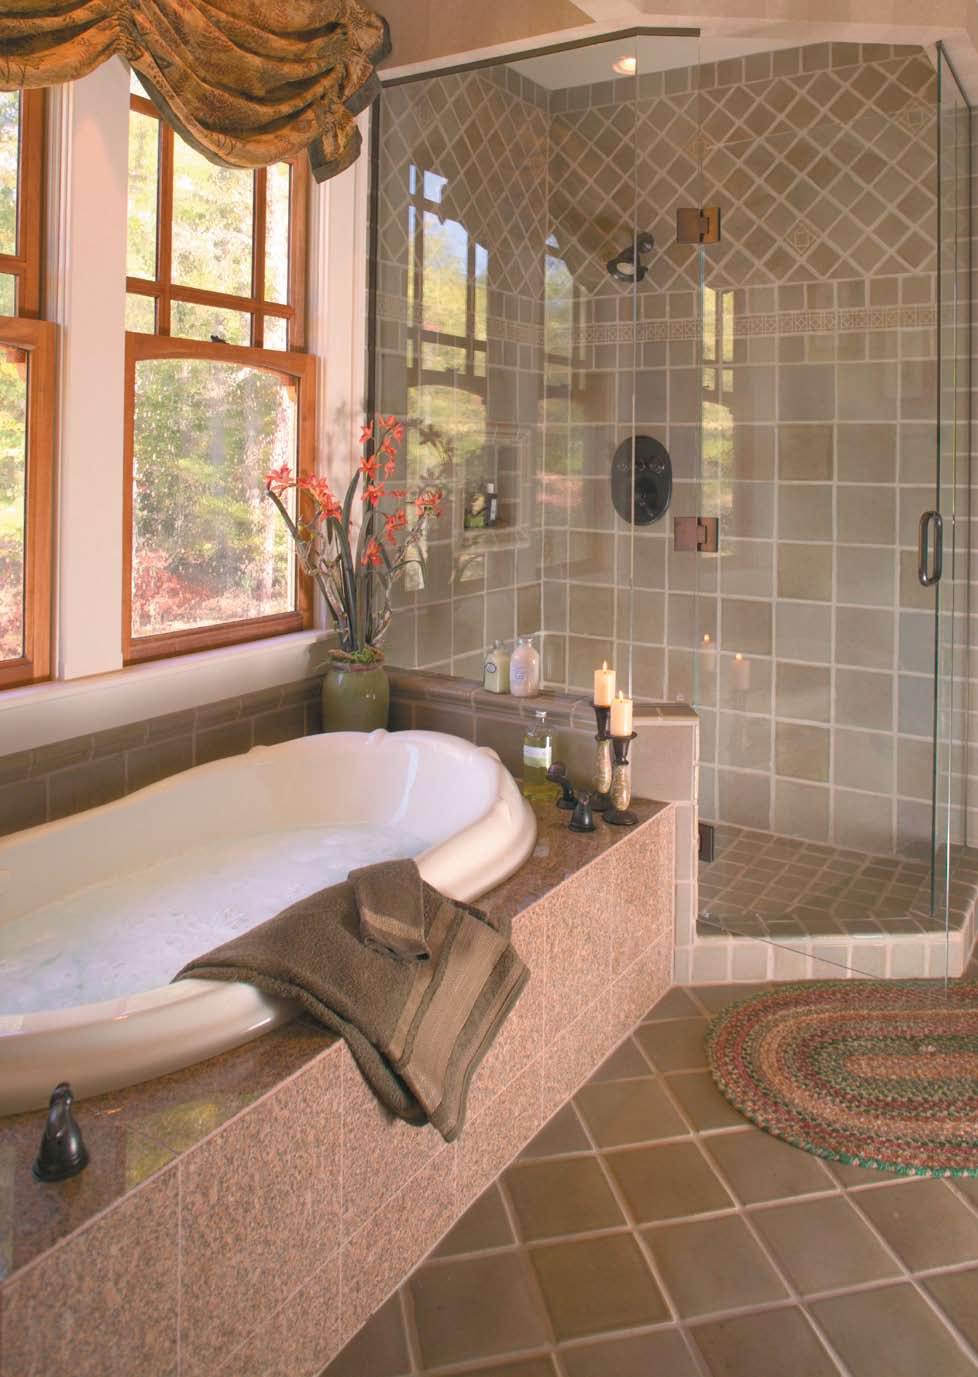 Country Home Country Home tiles echo the seasons with a rich palette of colors and decoratives inspired by warm summer days, a garden path, the fall harvest and a